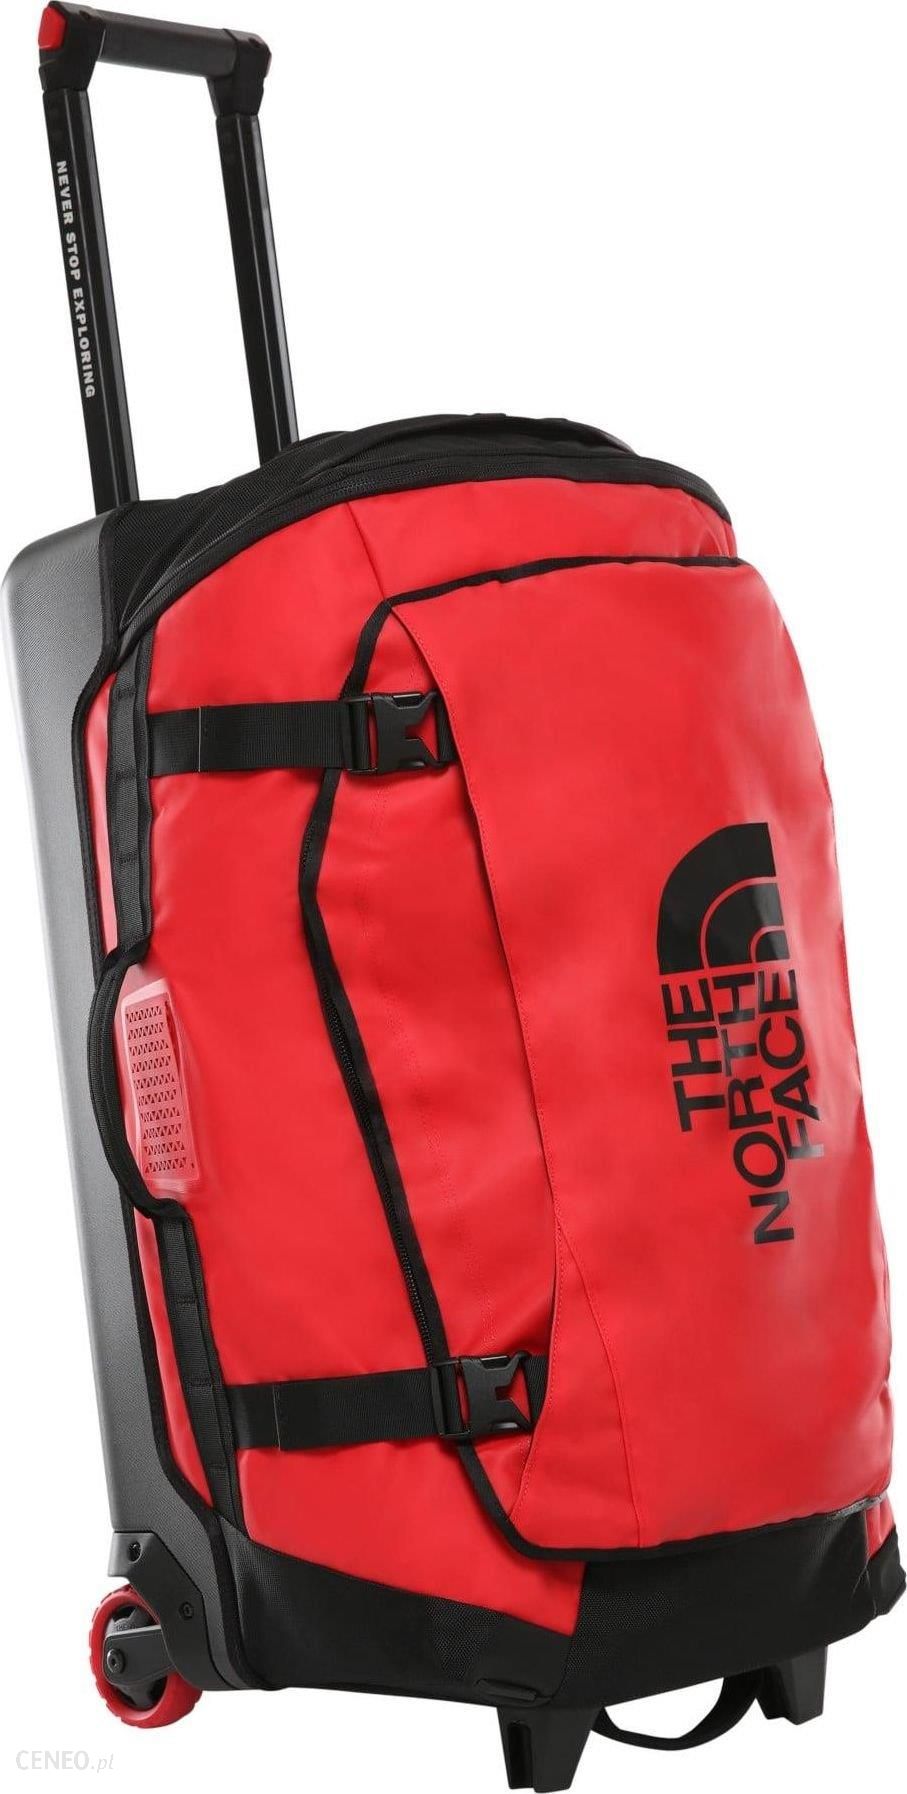 Kansen mate Kwalificatie The North Face Torba podróżna The North Face Rolling Thunder 30 T93C93KZ3 -  Ceny i opinie - Ceneo.pl